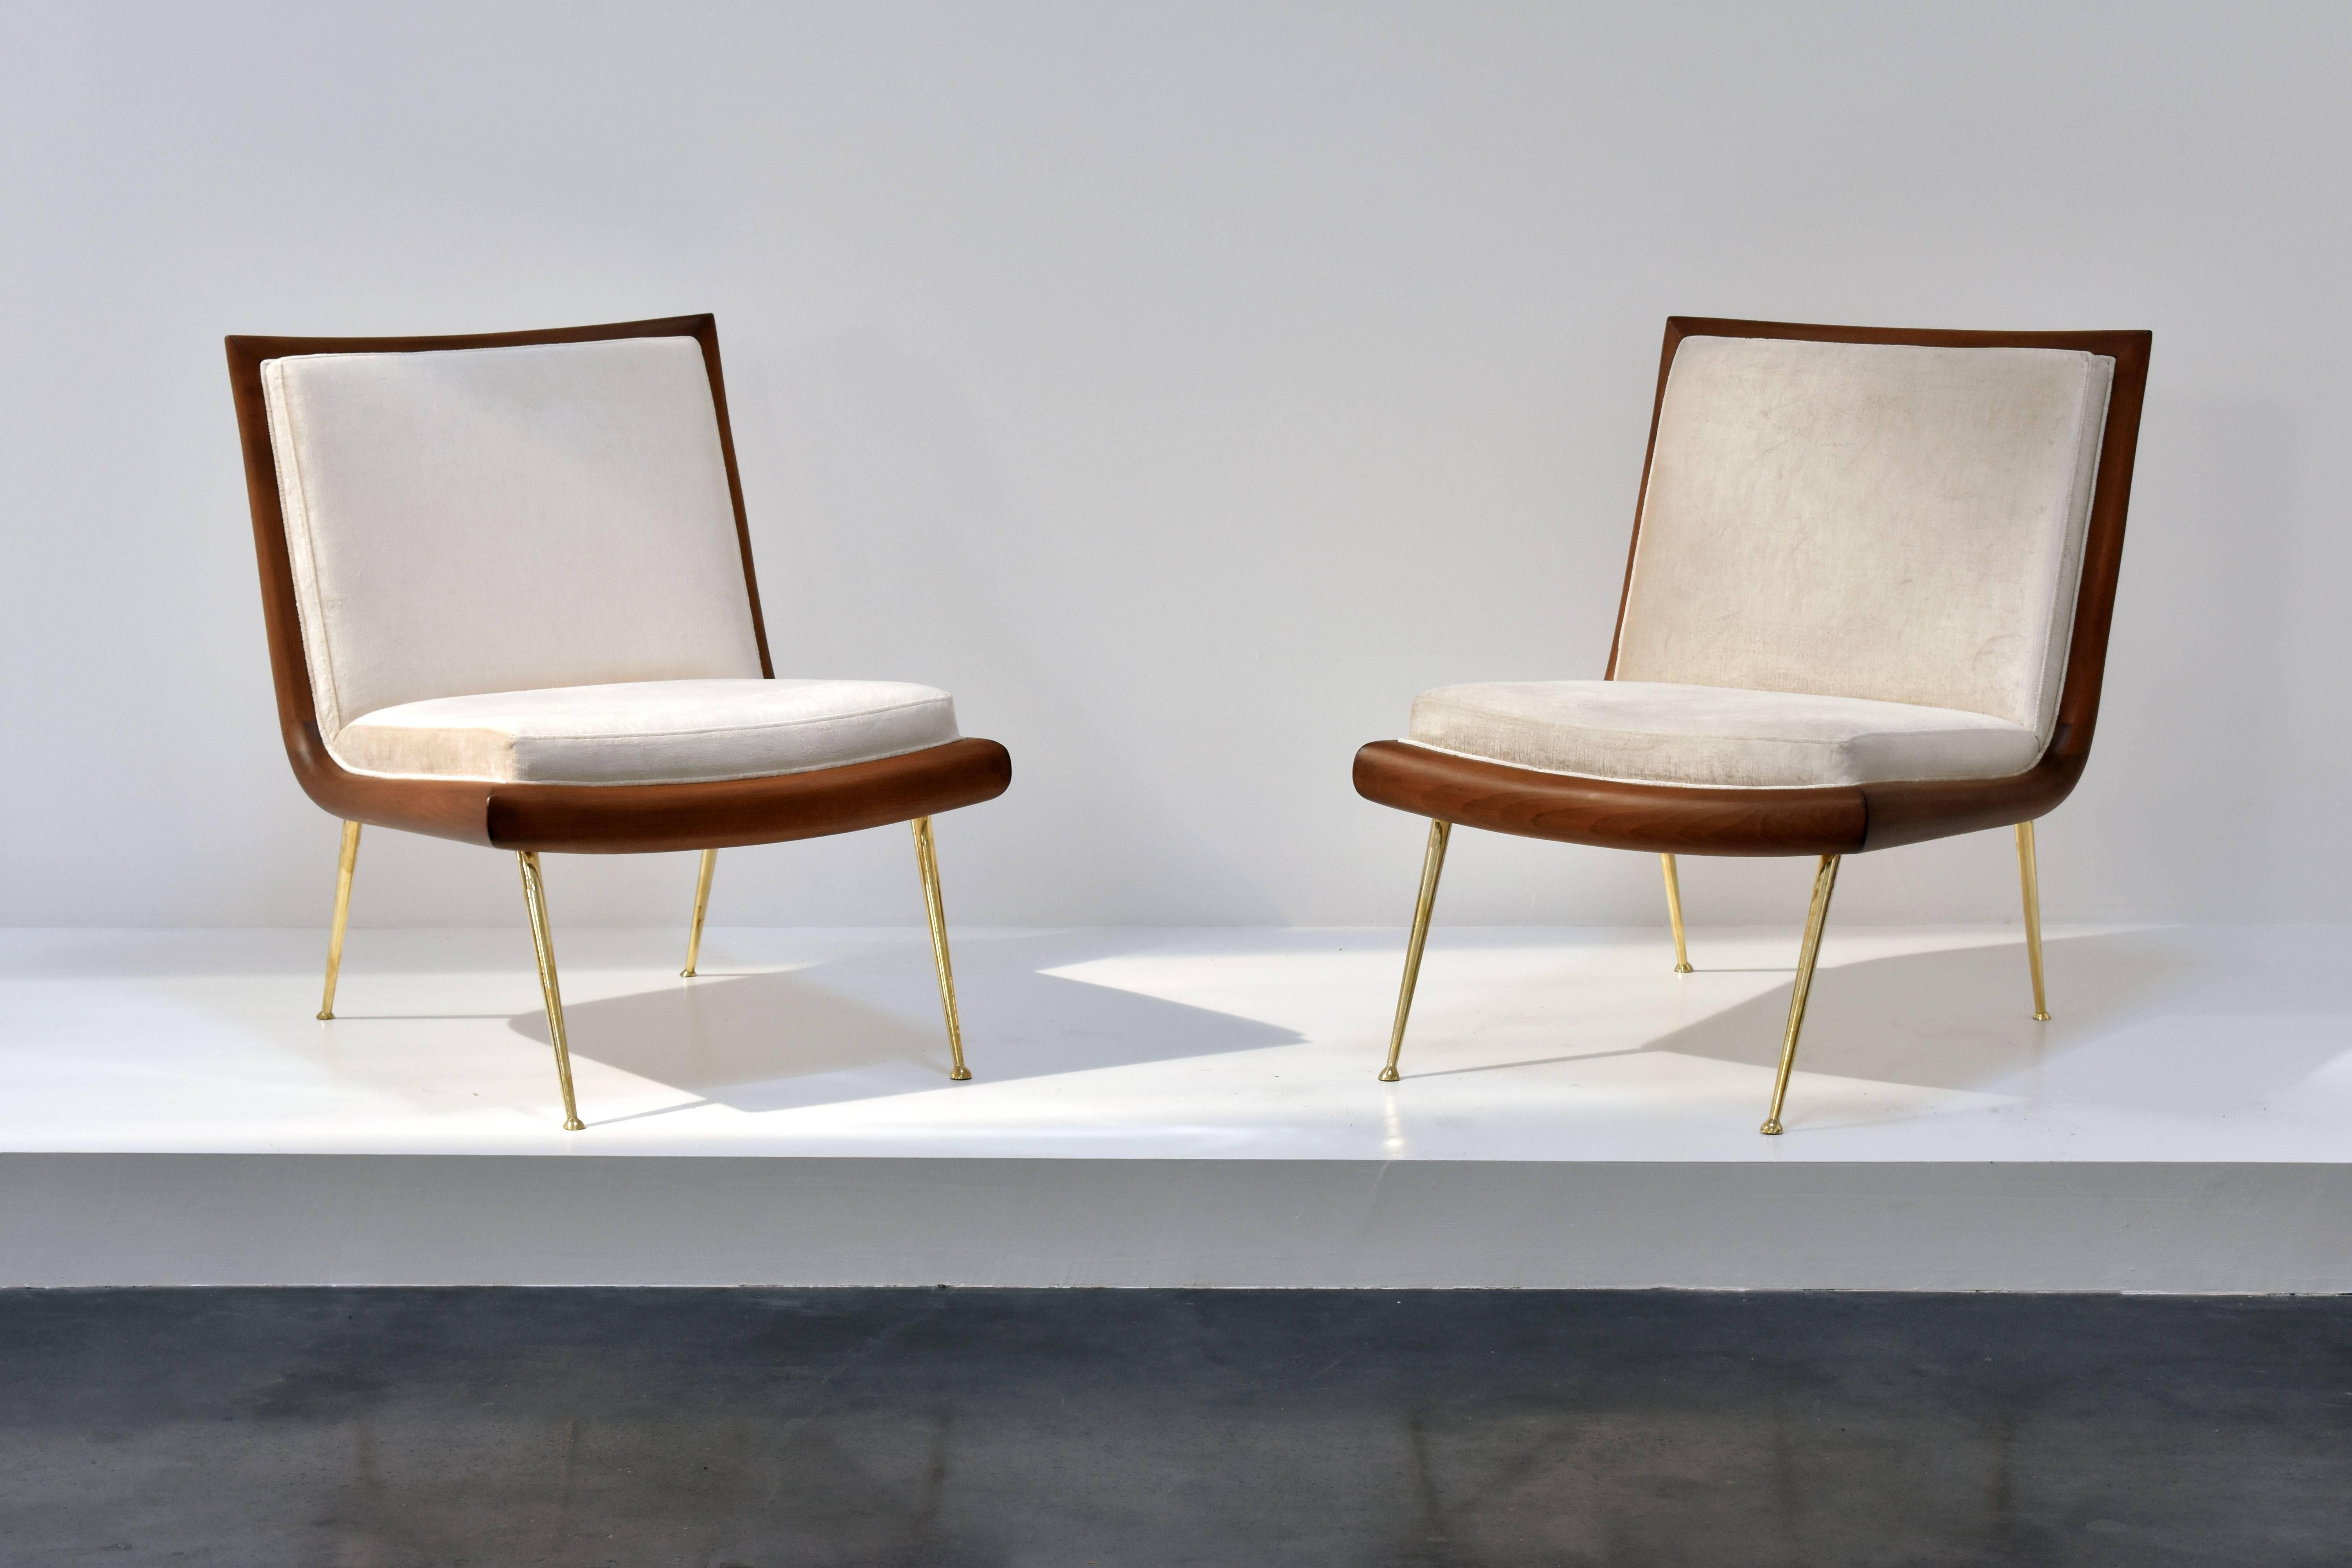 A rare pair of elegant cocktail chairs or slipper chairs designed by T.H. Robsjohn-Gibbings. The dark walnut provides an elegant contrast to the light beige velvet fabric and polished brass legs. Manufactured by The Widdicomb Furniture Company.

 